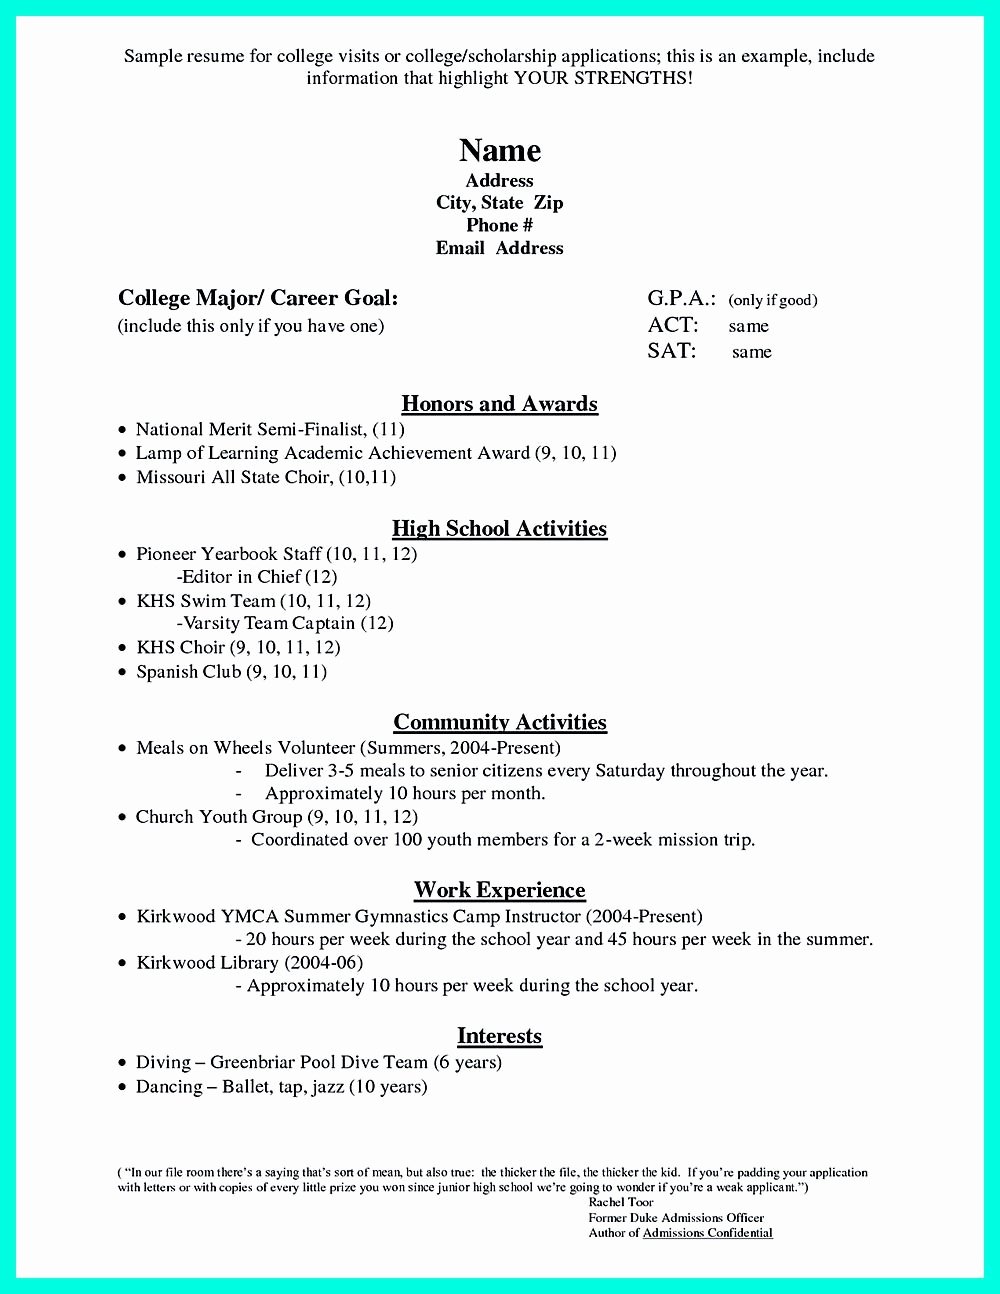 Pin On Resume Sample Template and format